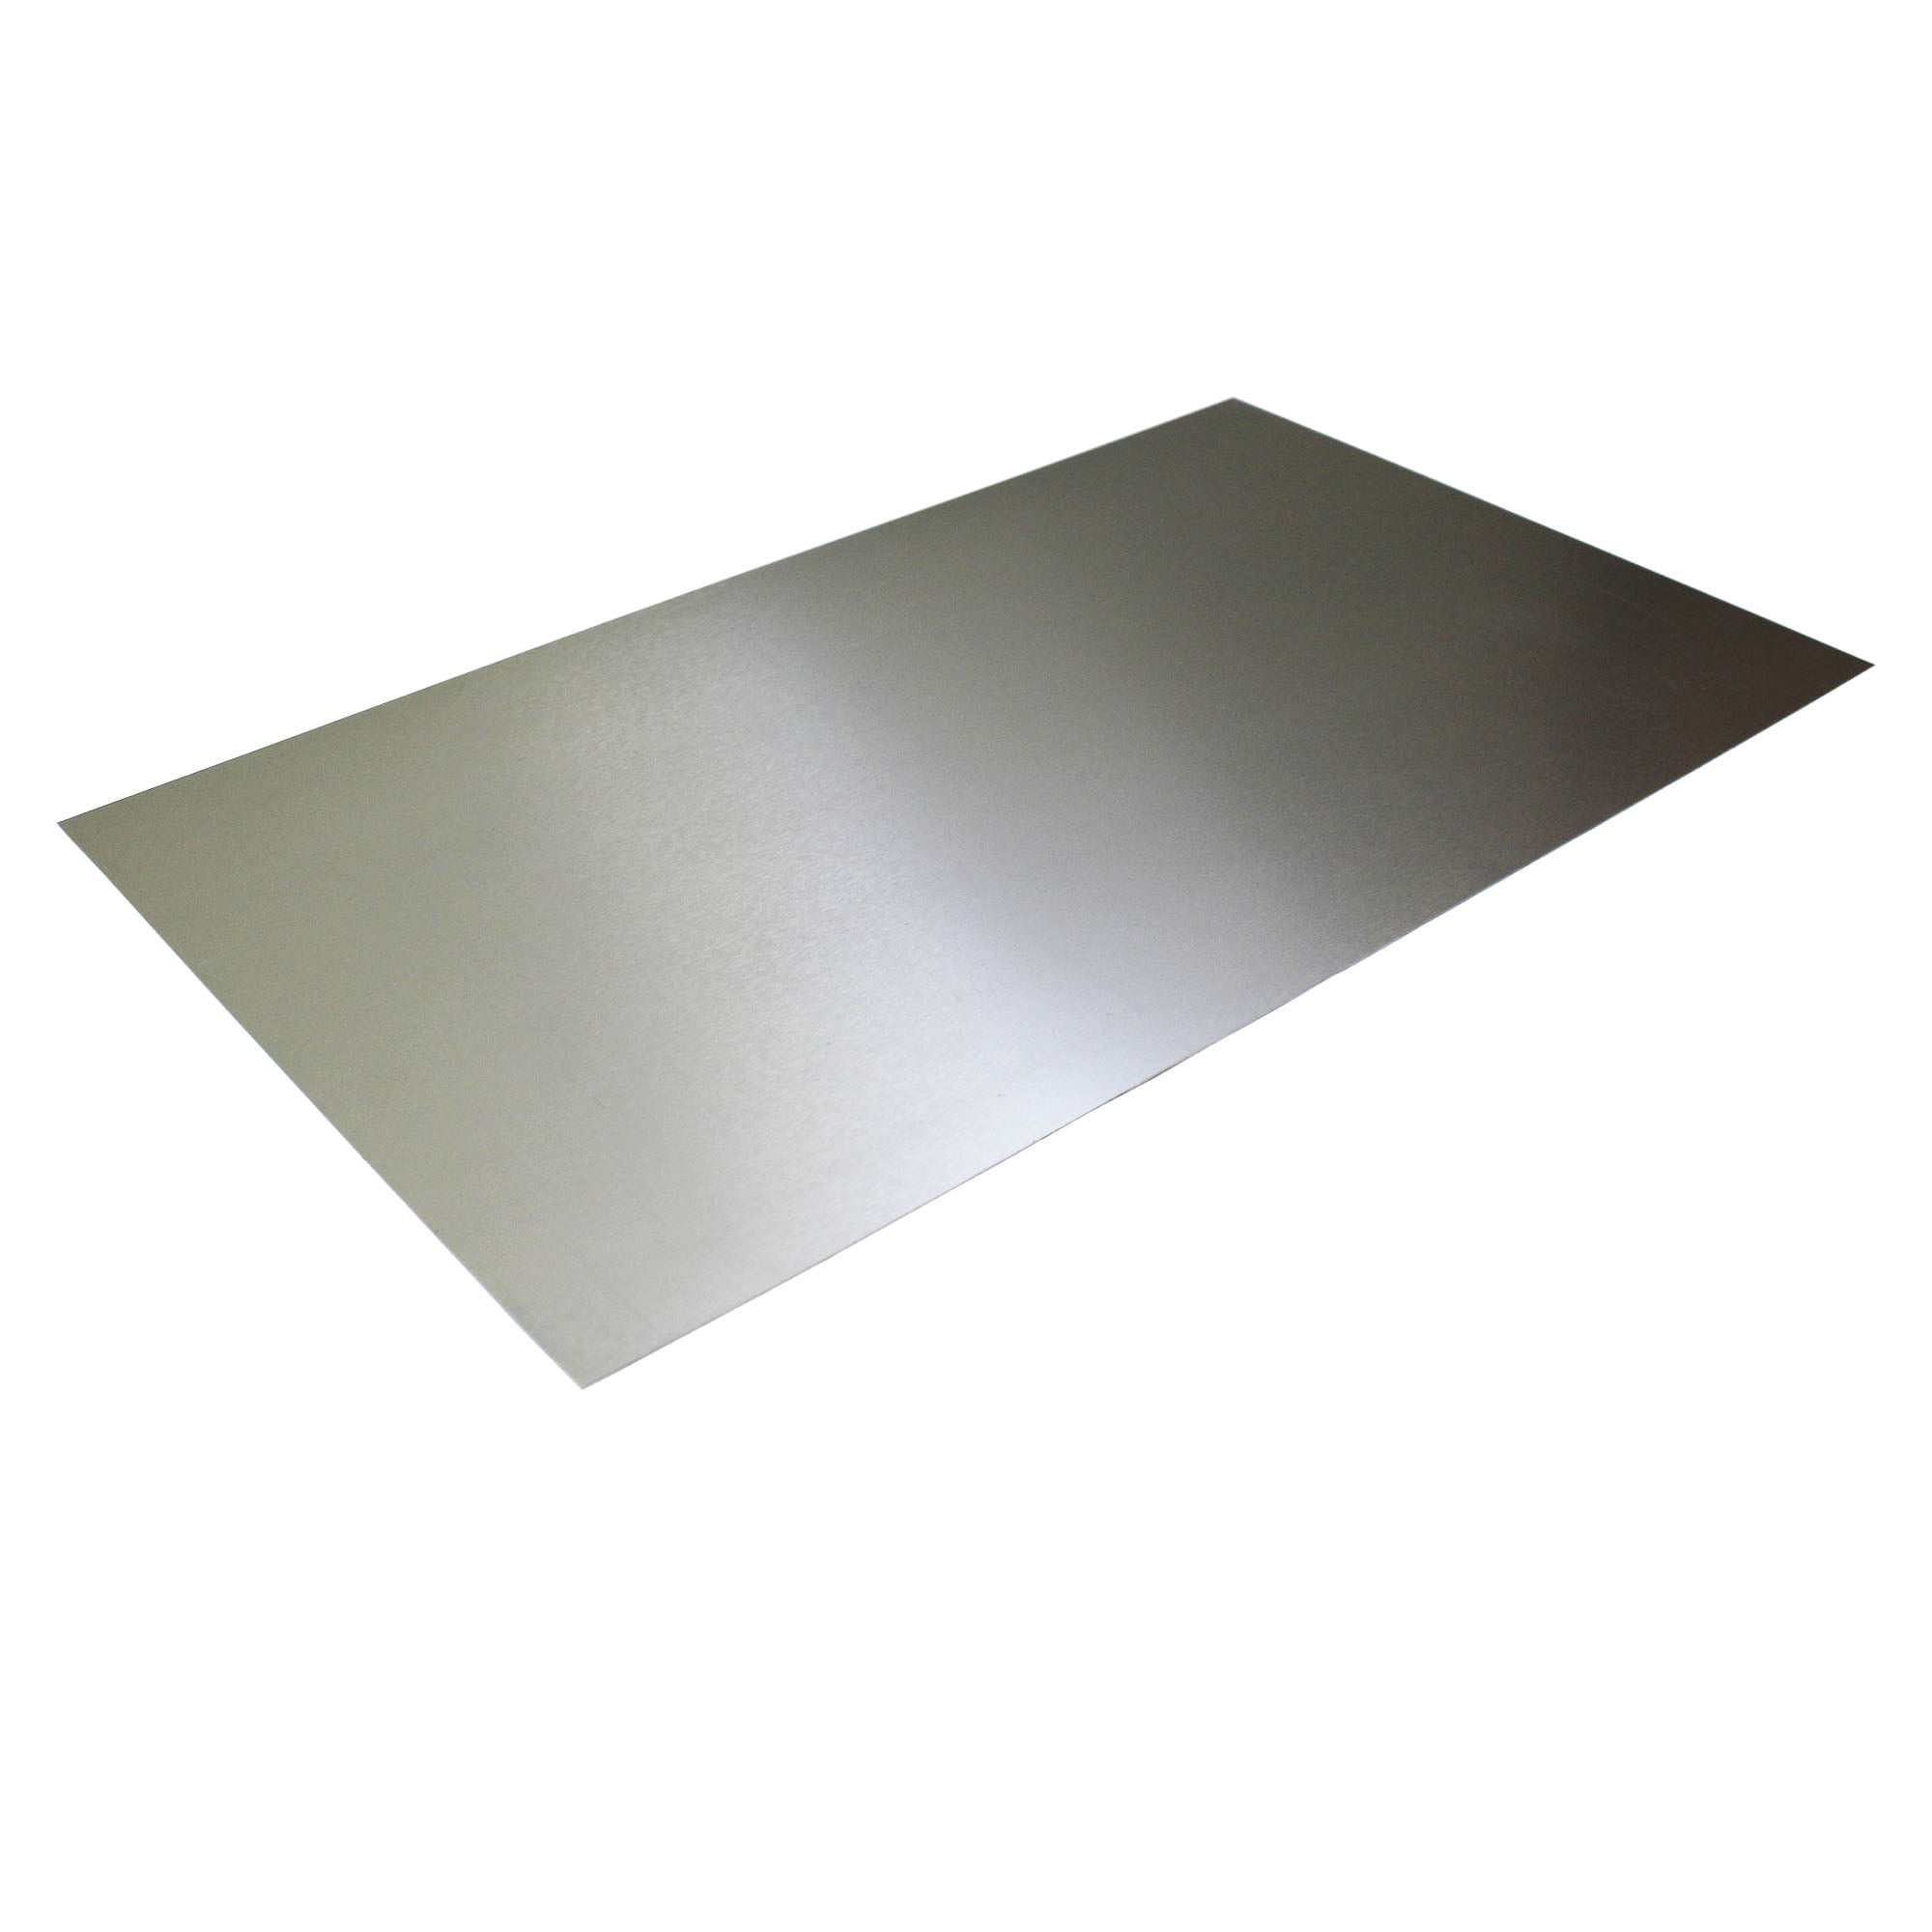 0.5mm Thick Sheet Of Steel  2 x 1 Metre Panel - Speciality Metals